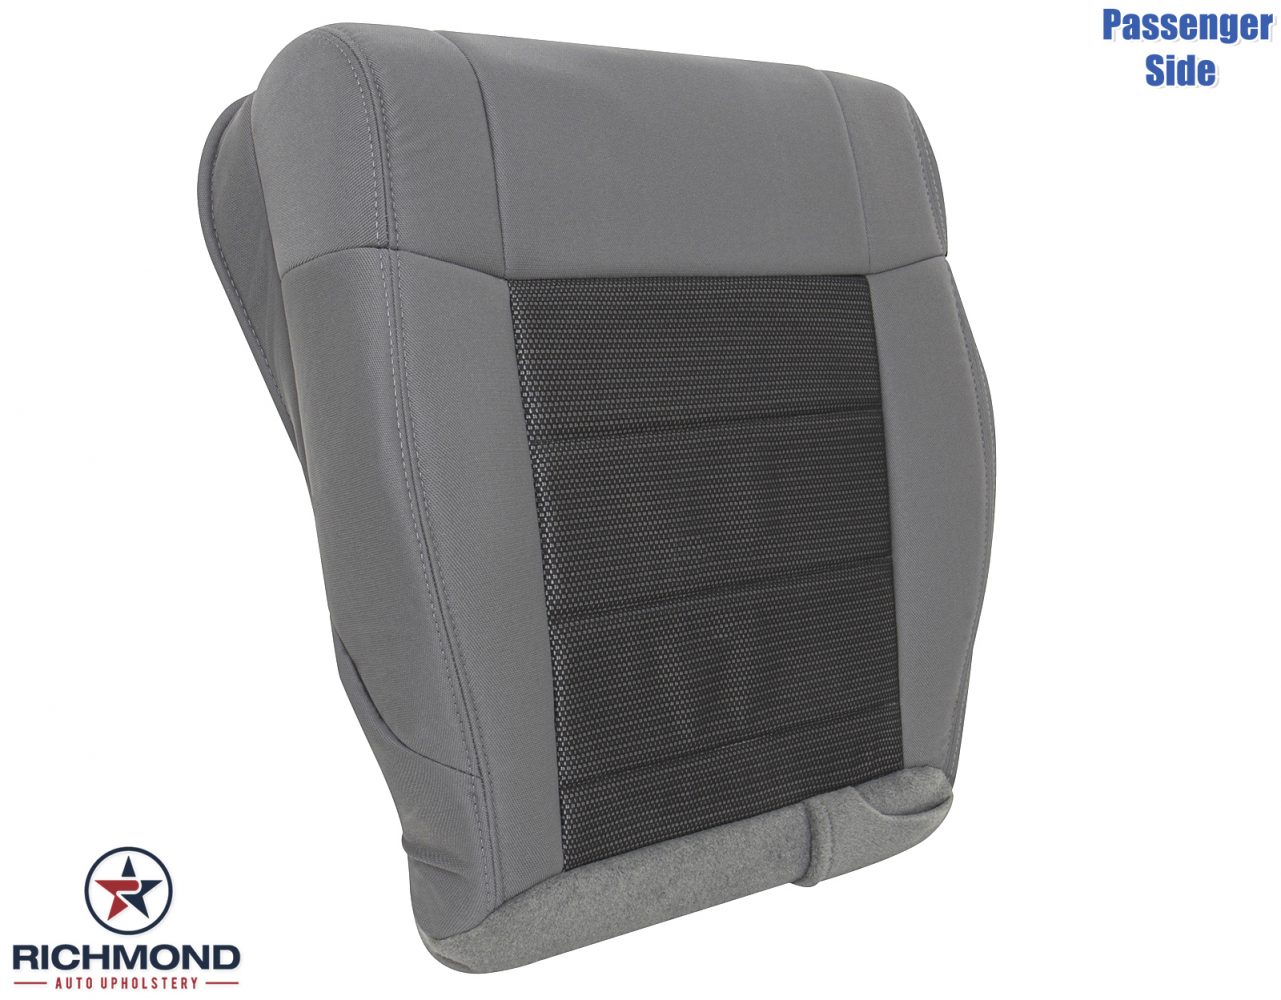 2008-2010 Jeep Wrangler Replacement Cloth Seat Cover: Passenger Side  Bottom, 2-Tone Gray - Richmond Auto Upholstery